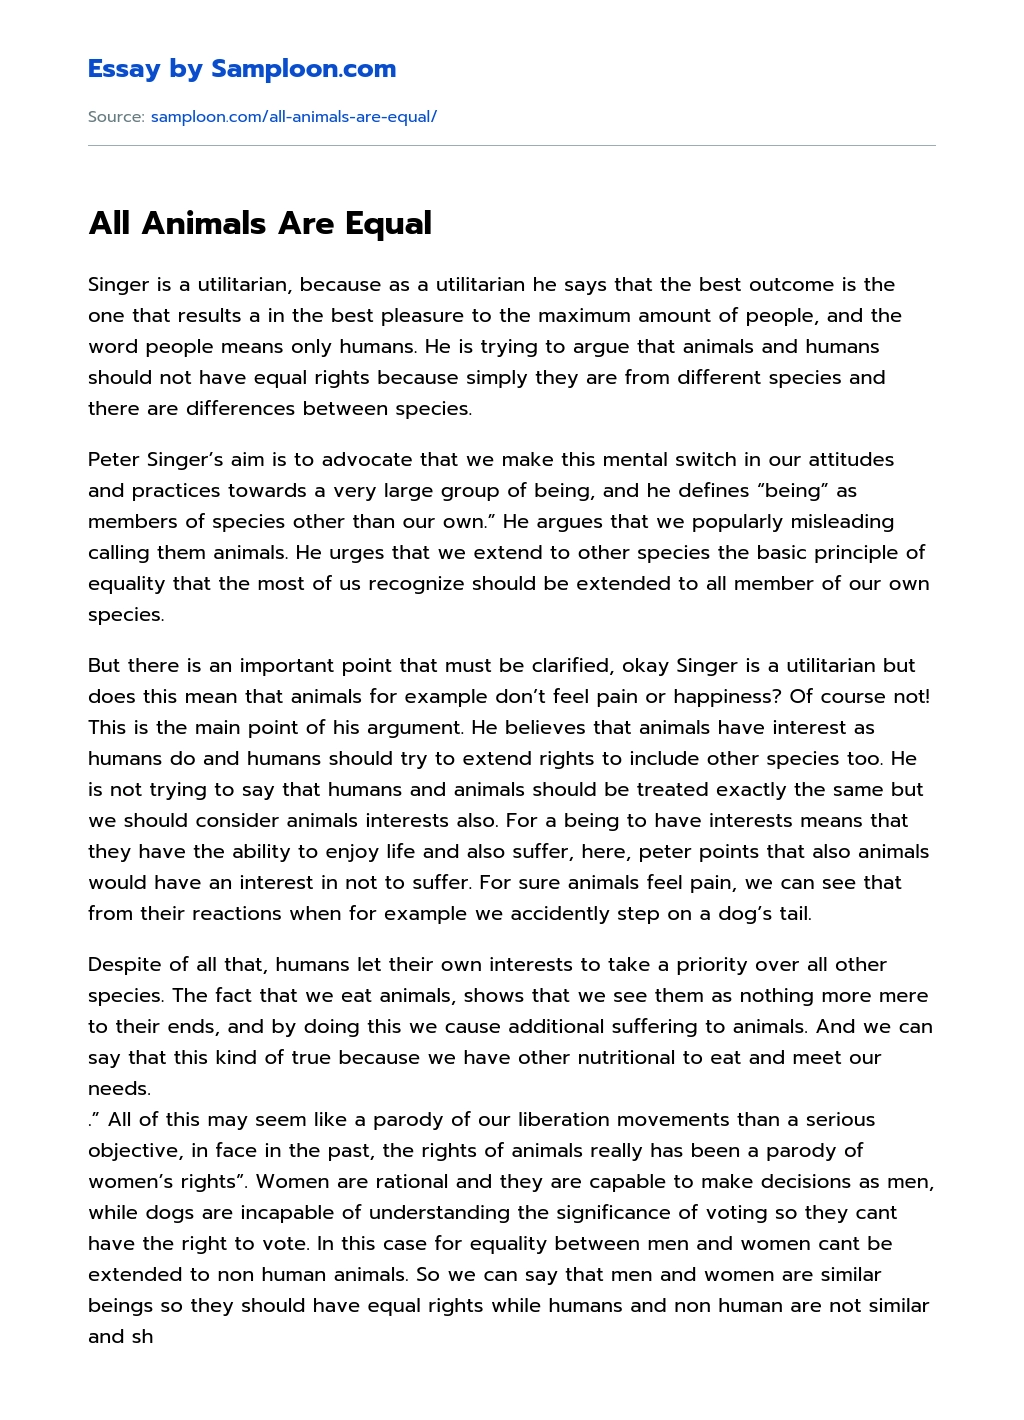 All Animals Are Equal essay